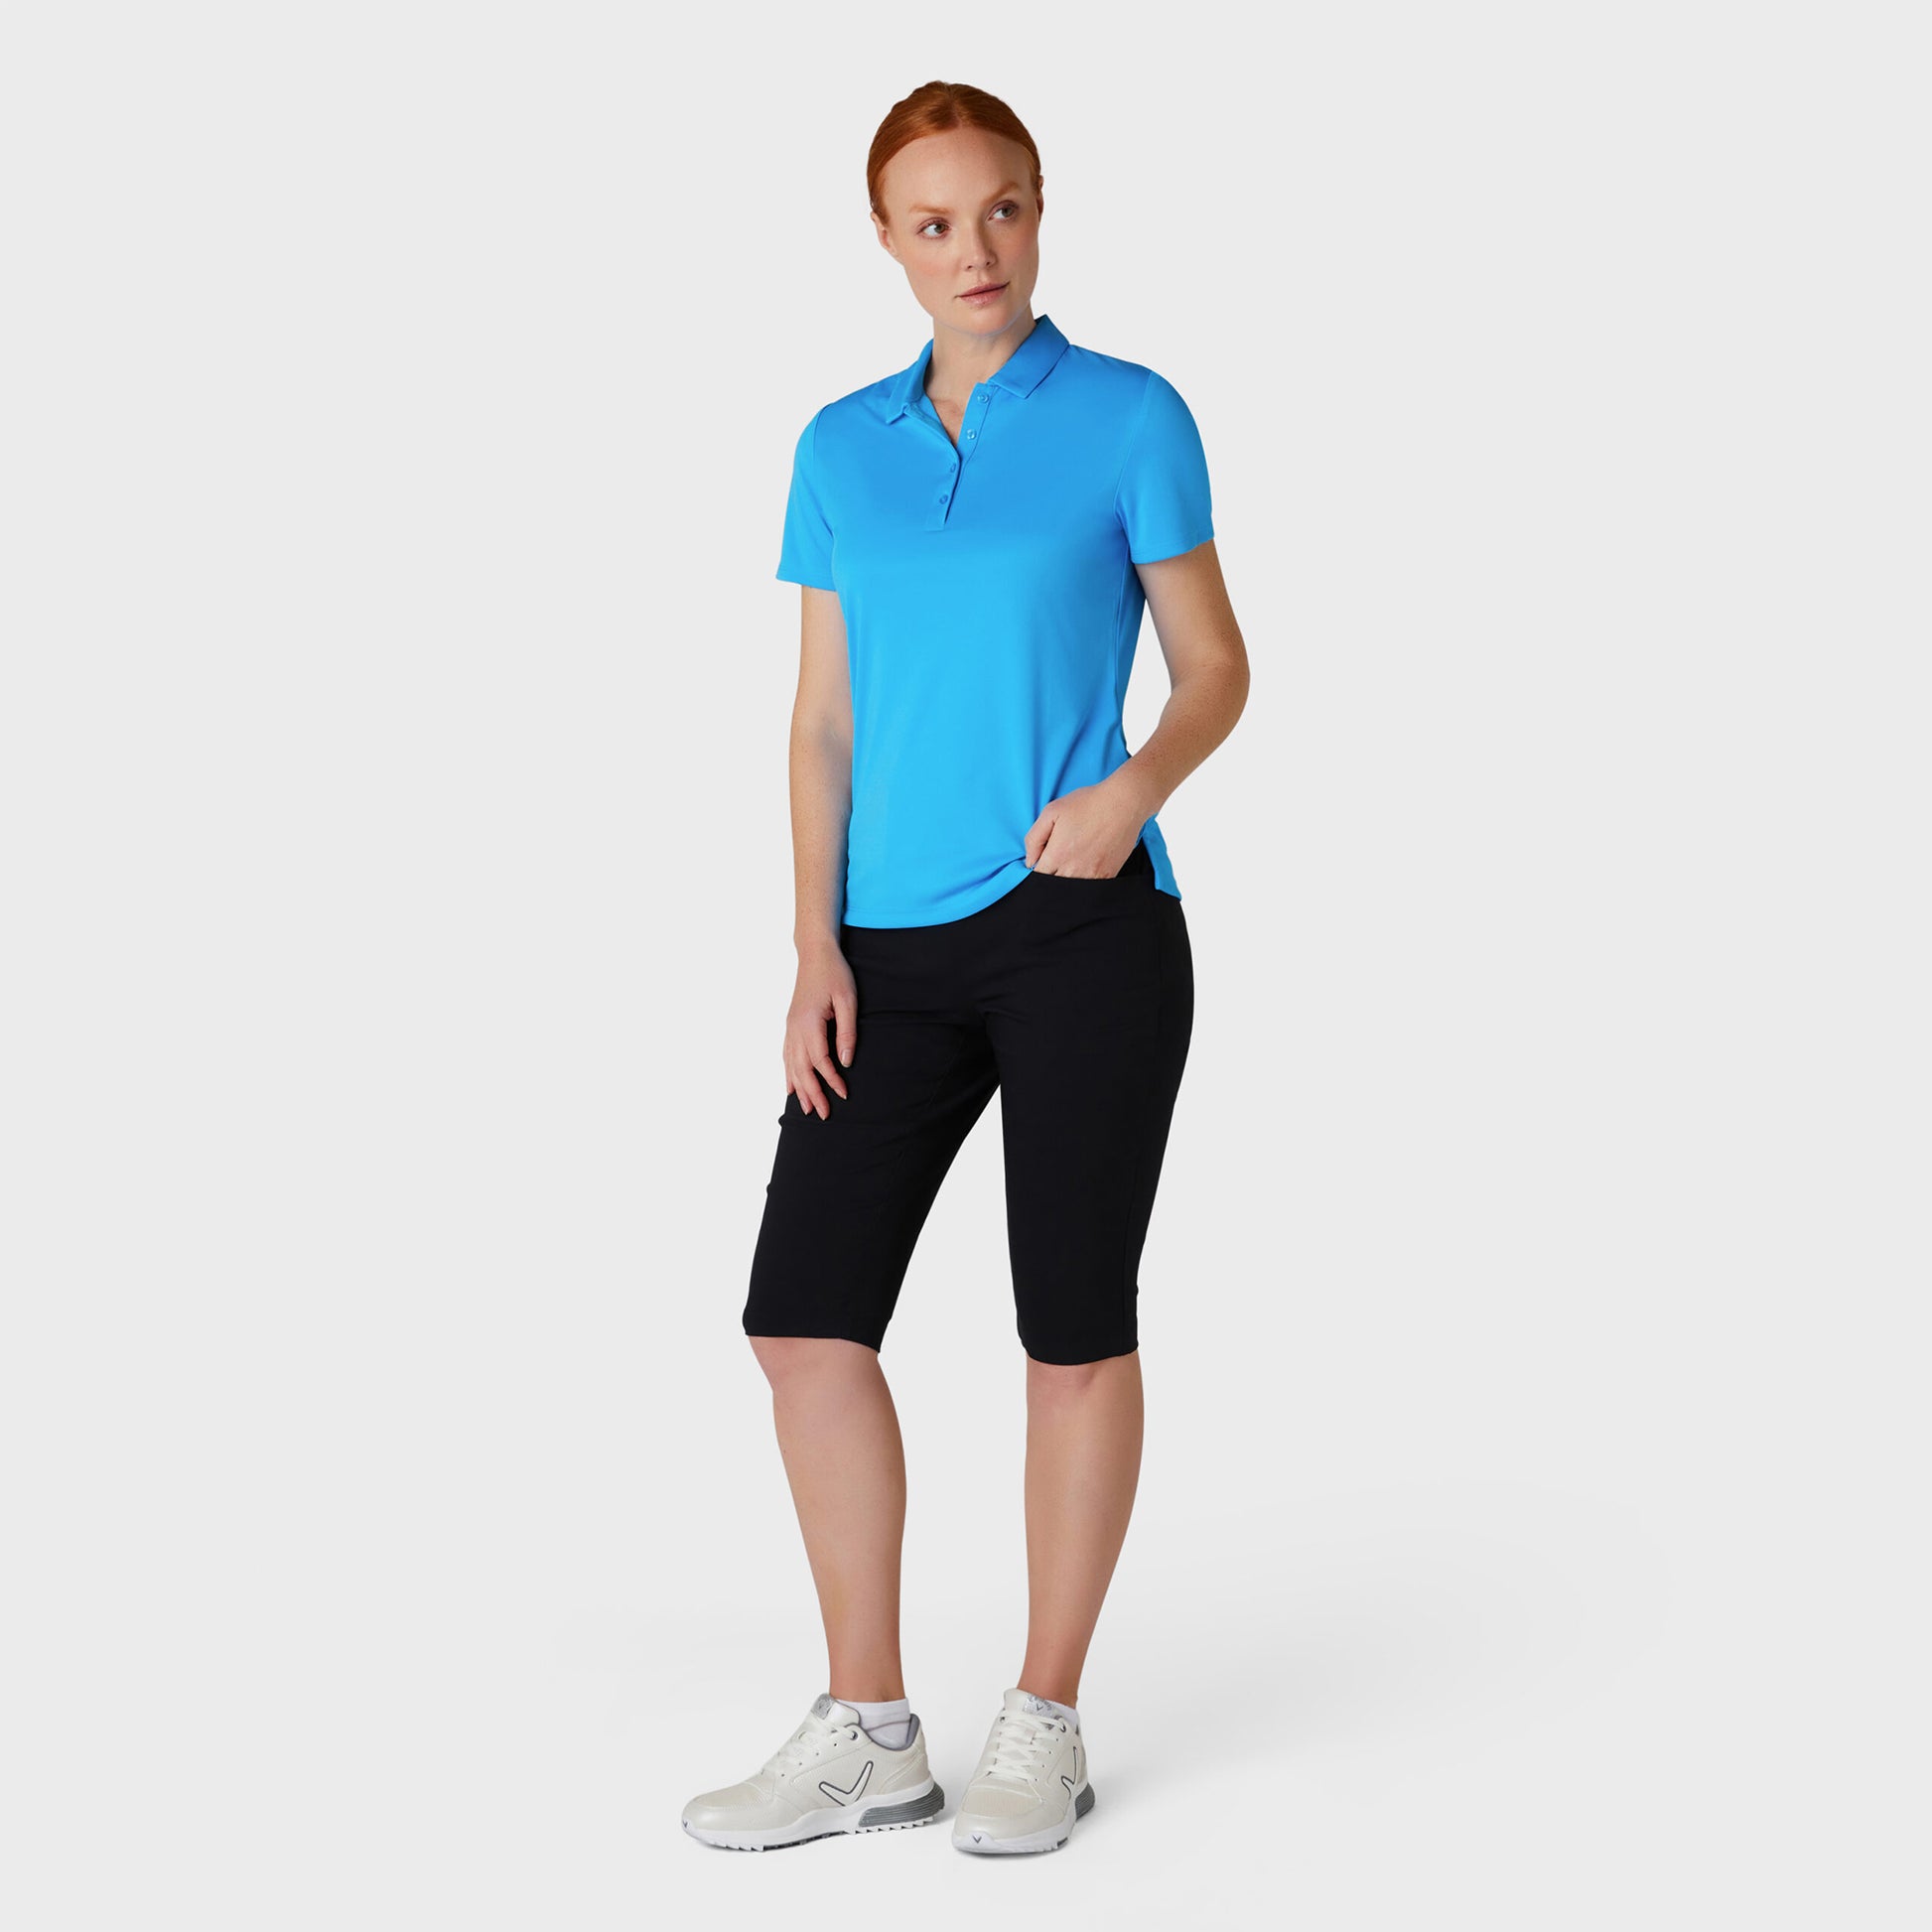 Callaway Ladies Spring Break Blue Short Sleeve Polo with UV Block Protection